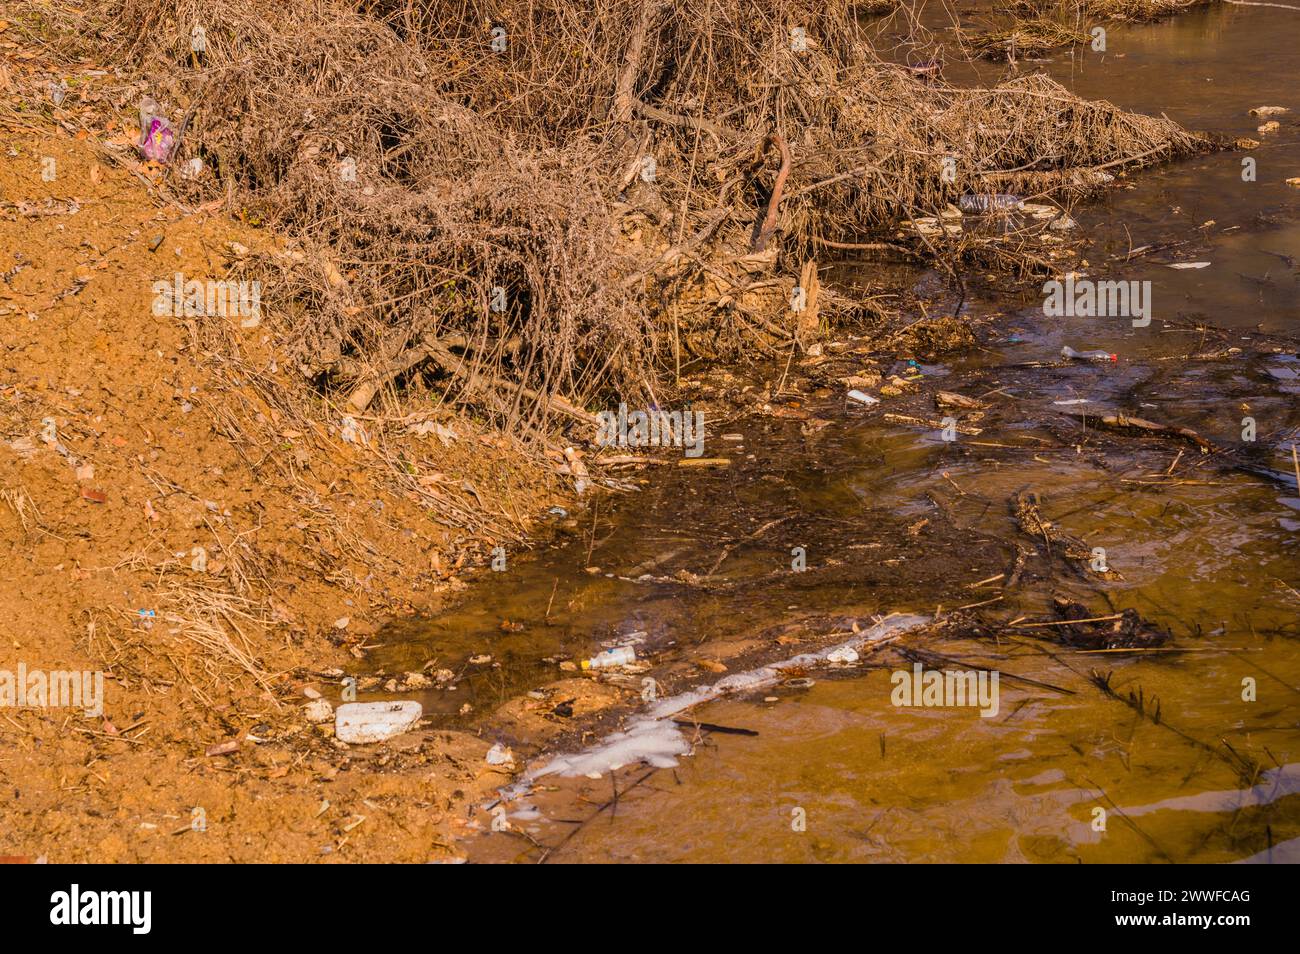 A small stream flows through a muddy landscape with signs of vegetation erosion, in South Korea Stock Photo